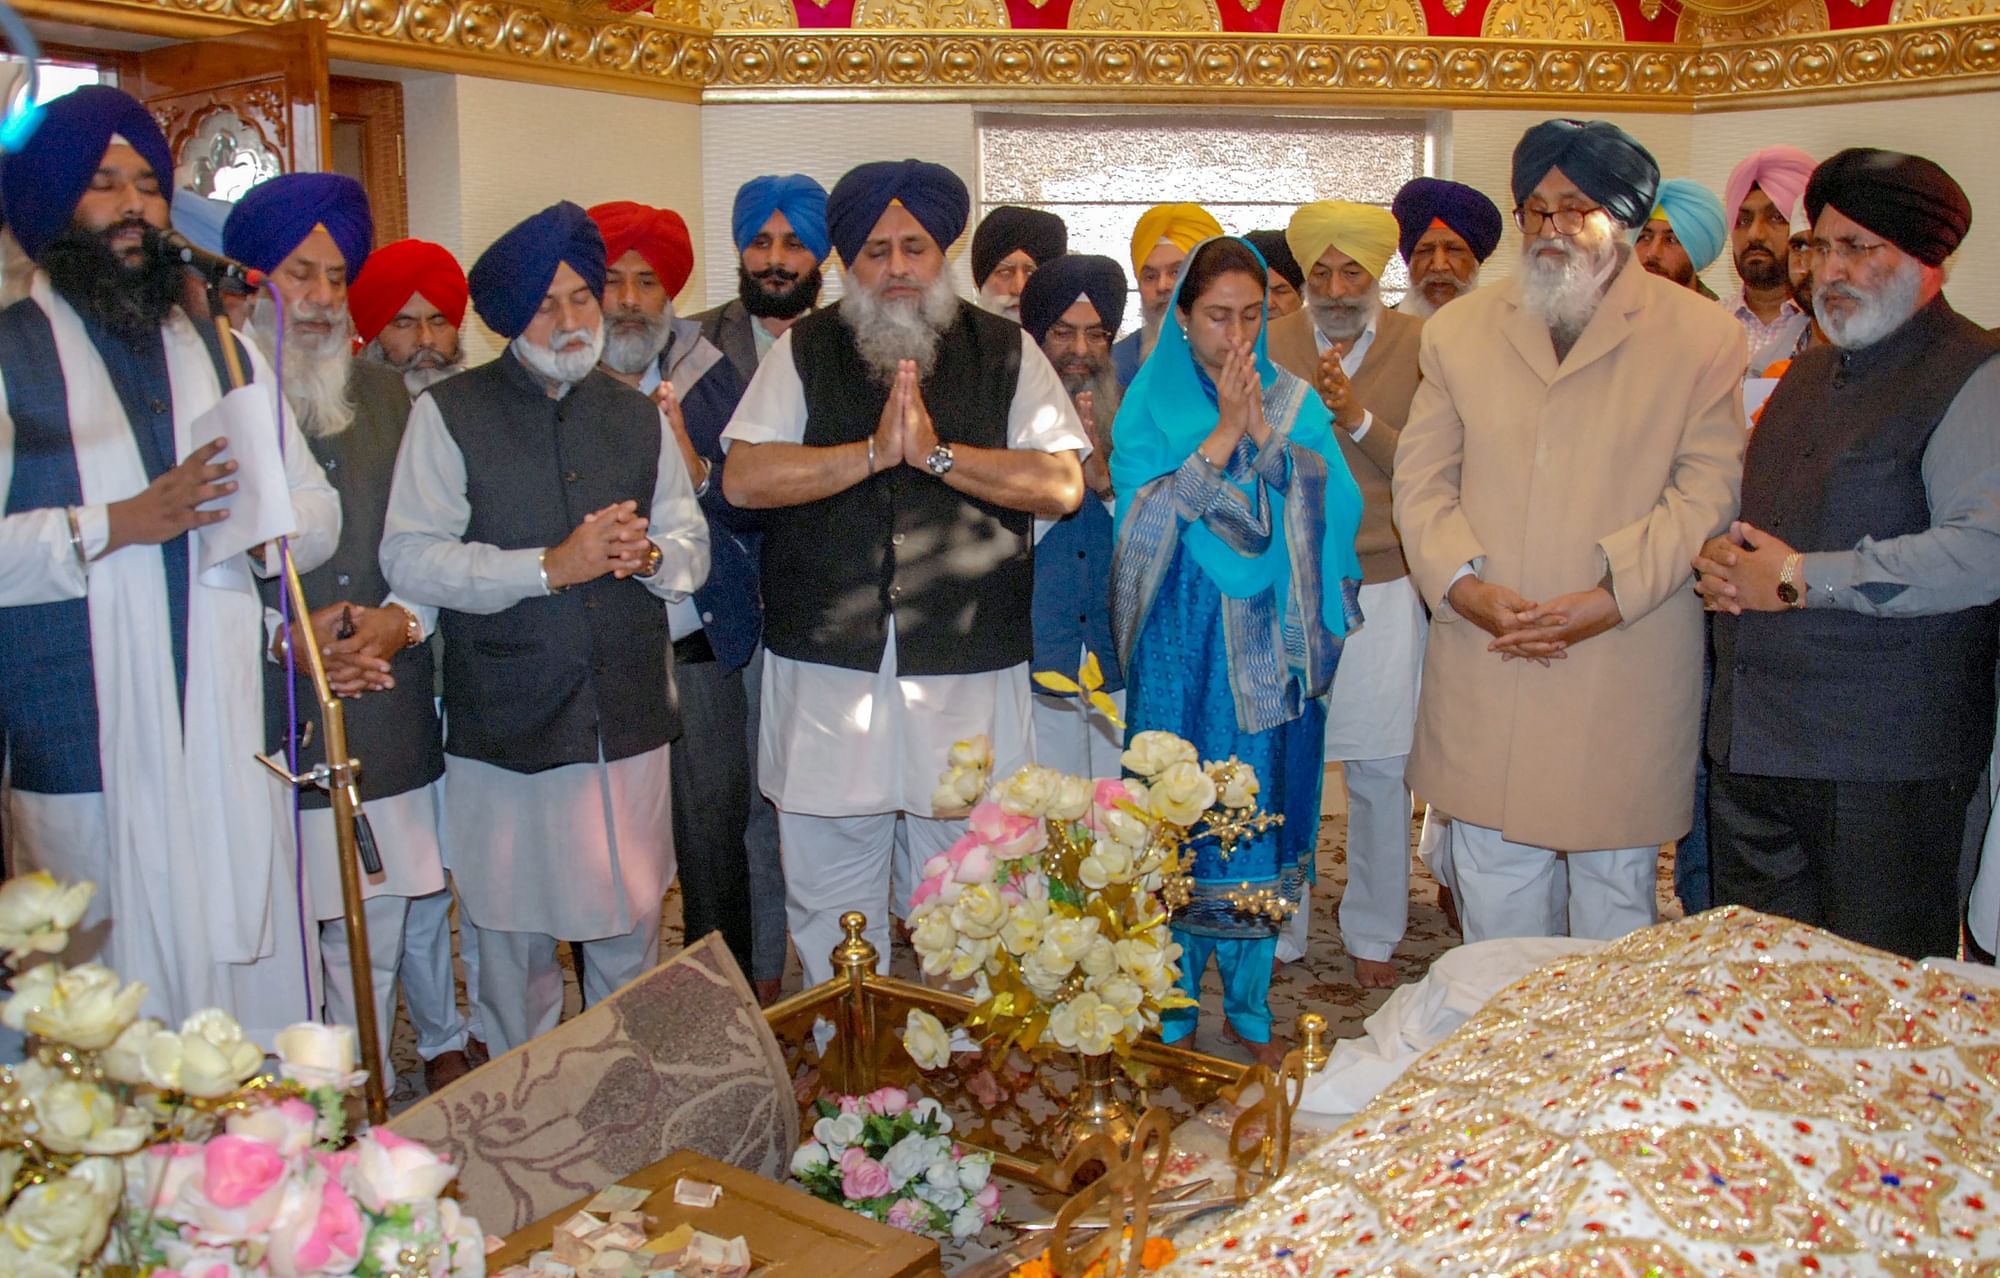 Former chief minister of Punjab Parkash Singh Badal, Shiromani Akali Dal President Sukhbir Singh Badal and Union minister Harsimrat Kaur Badal with other SAD leaders offer prayers in front of the Guru Granth Sahib, at the Golden Temple in Amritsar, Saturday, Dec. 8, 2018.